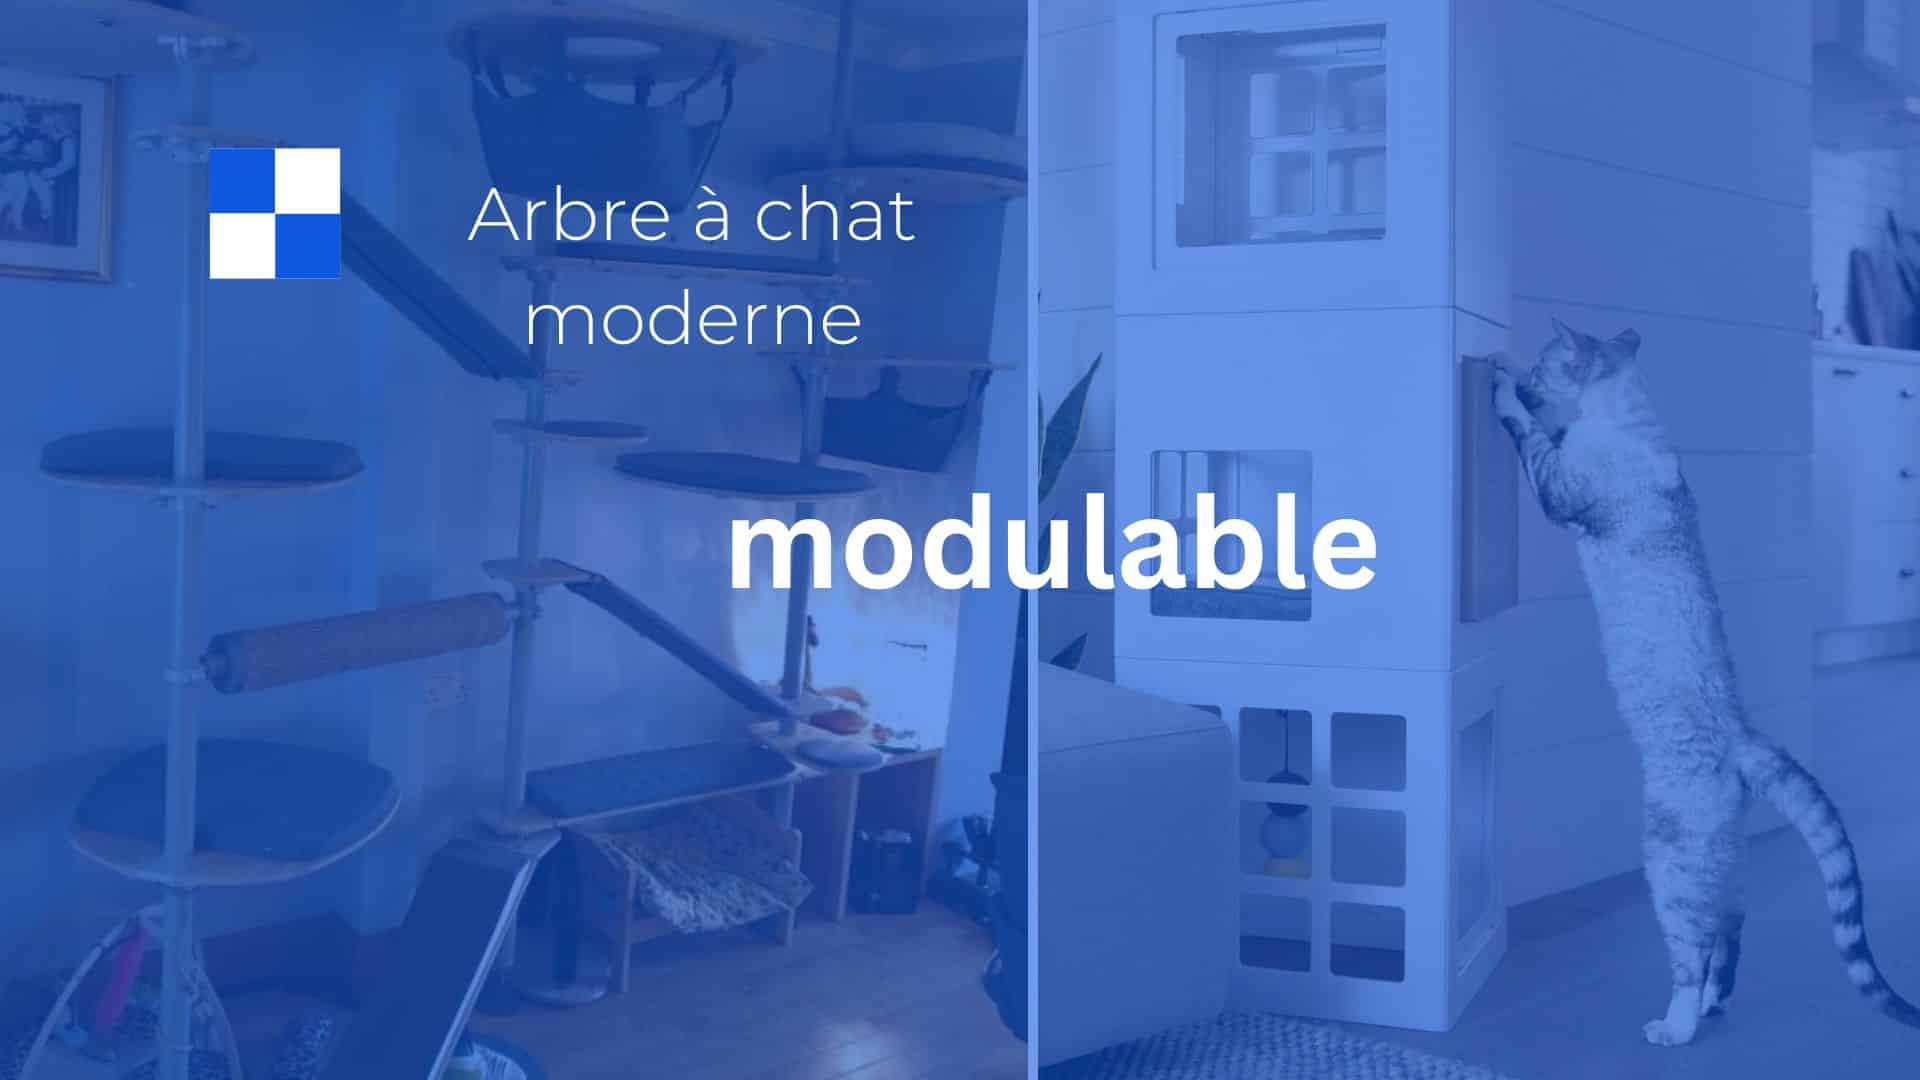 arbre a chat moderne modulable